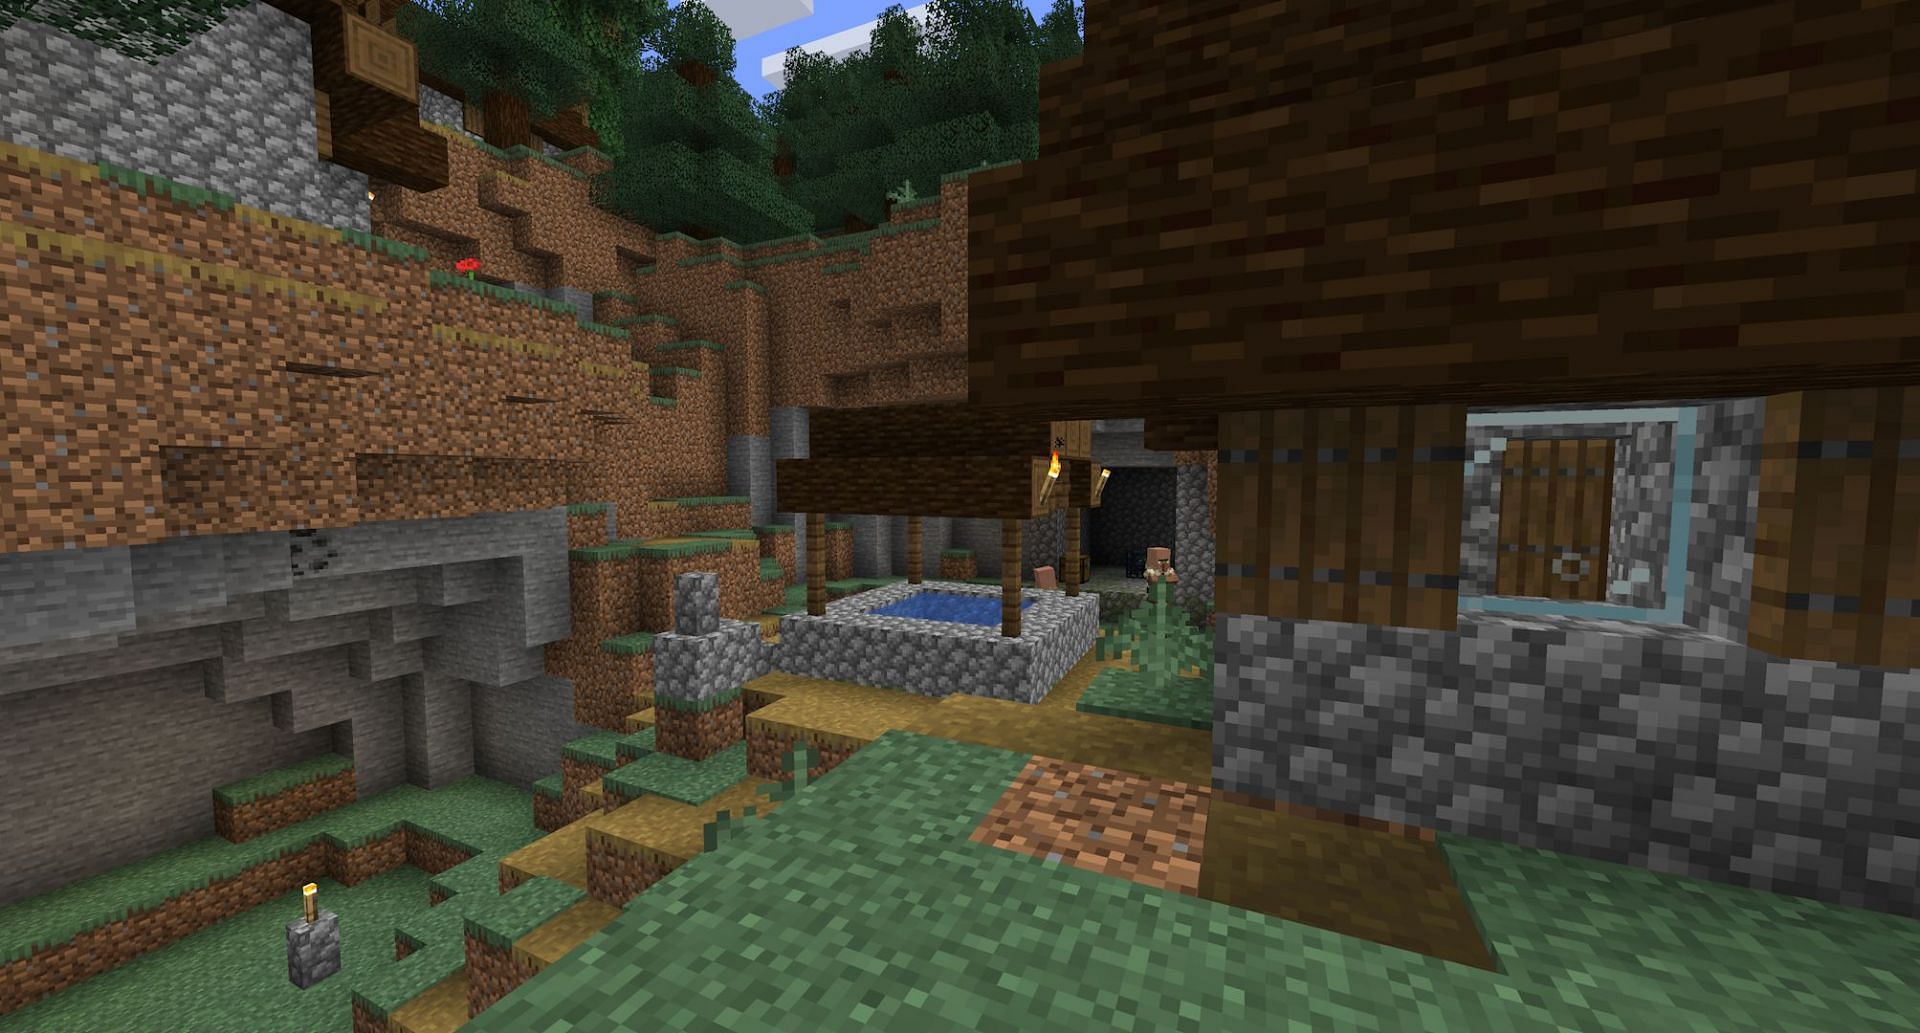 The village with a surface level dungeon (Image via Mojang)